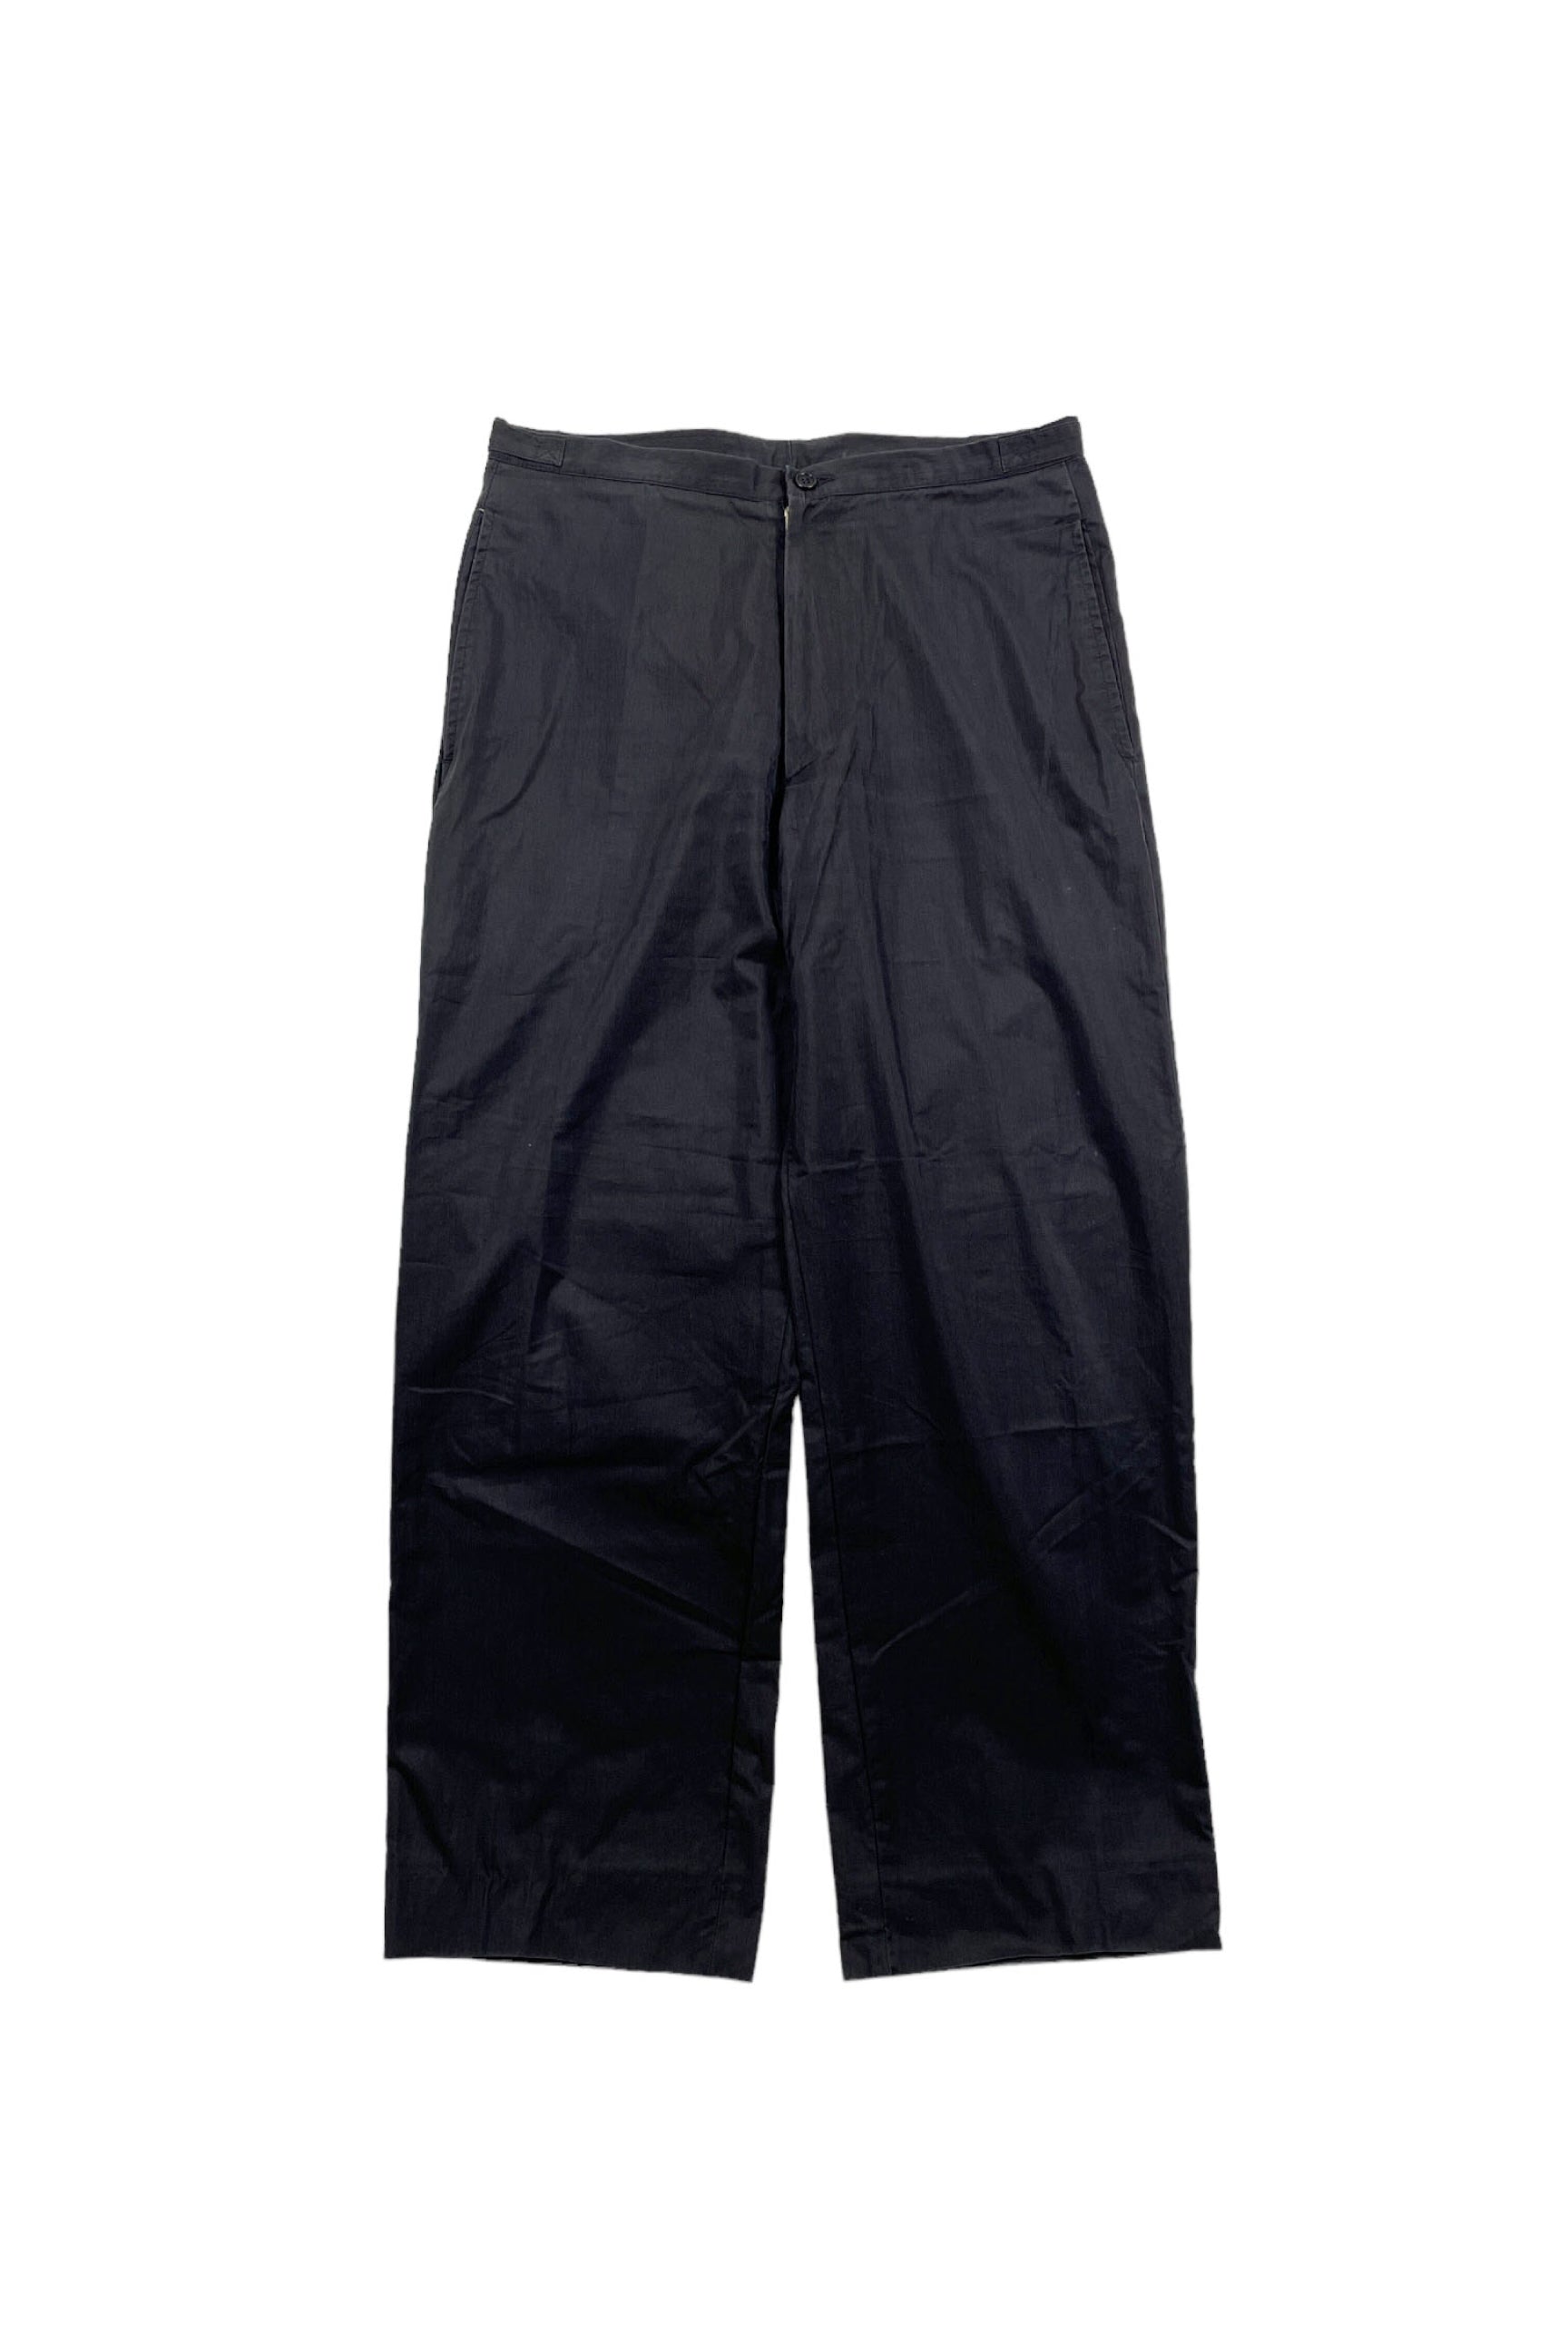 Made in ITALY GIANFRANCO FERRE nylon pants – ReSCOUNT STORE